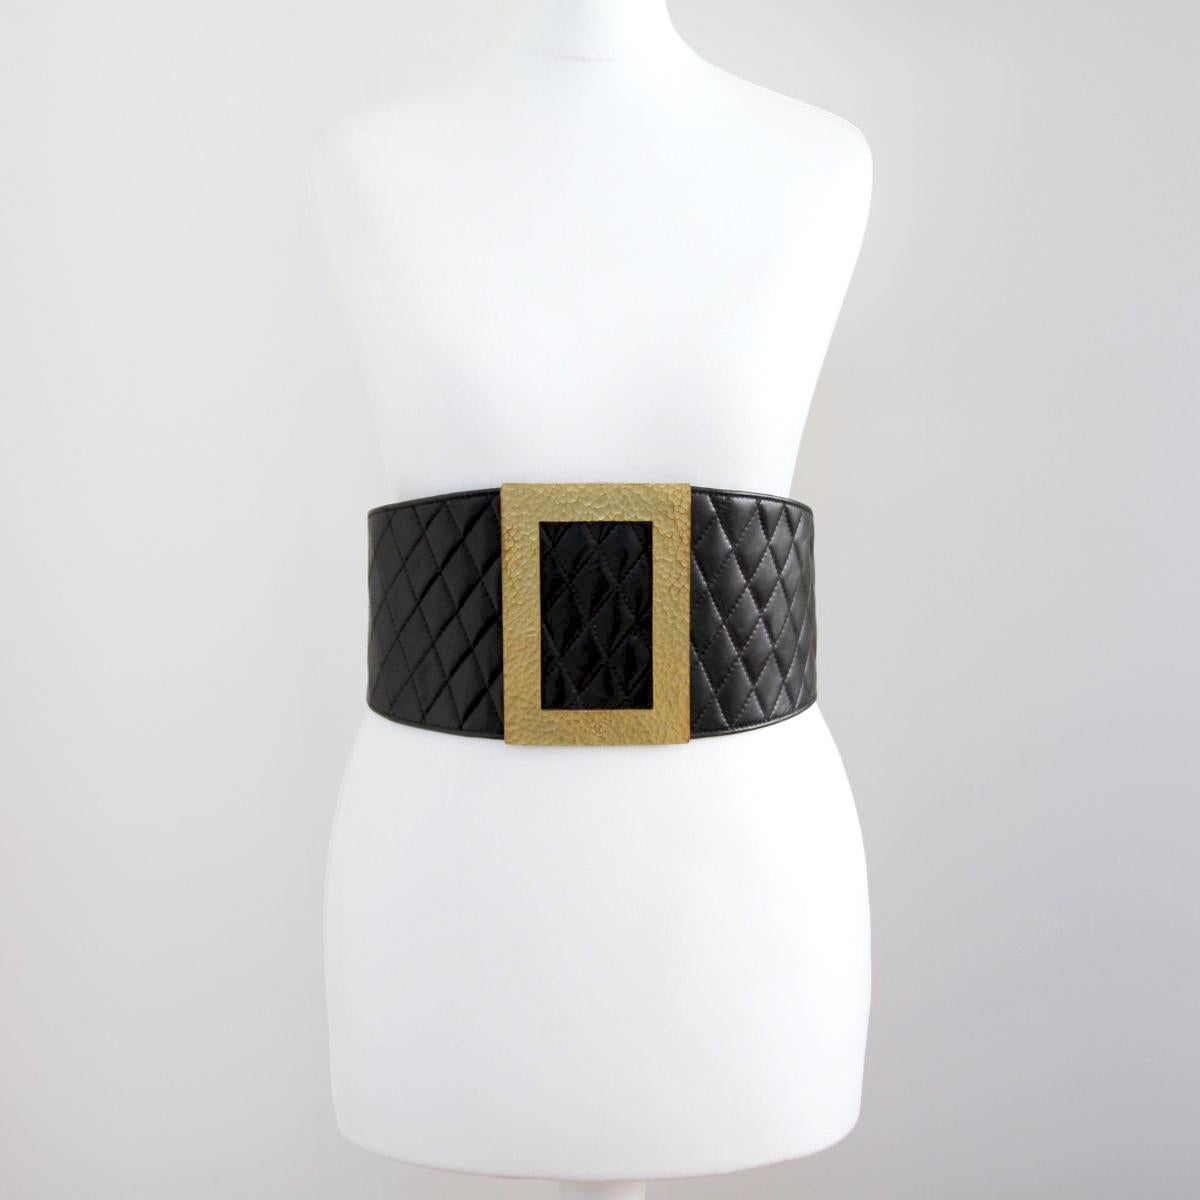 CHANEL 
 
1994. Iconic wide corset belt with diamond stitching from Chanel by Karl Lagerfeld. Buckle closure on the back. 

Buy Now Or Cry Later!
Get the Chanel supermodel look of the 90s.
 
The belt is in good condition (see photos). Minimal wear